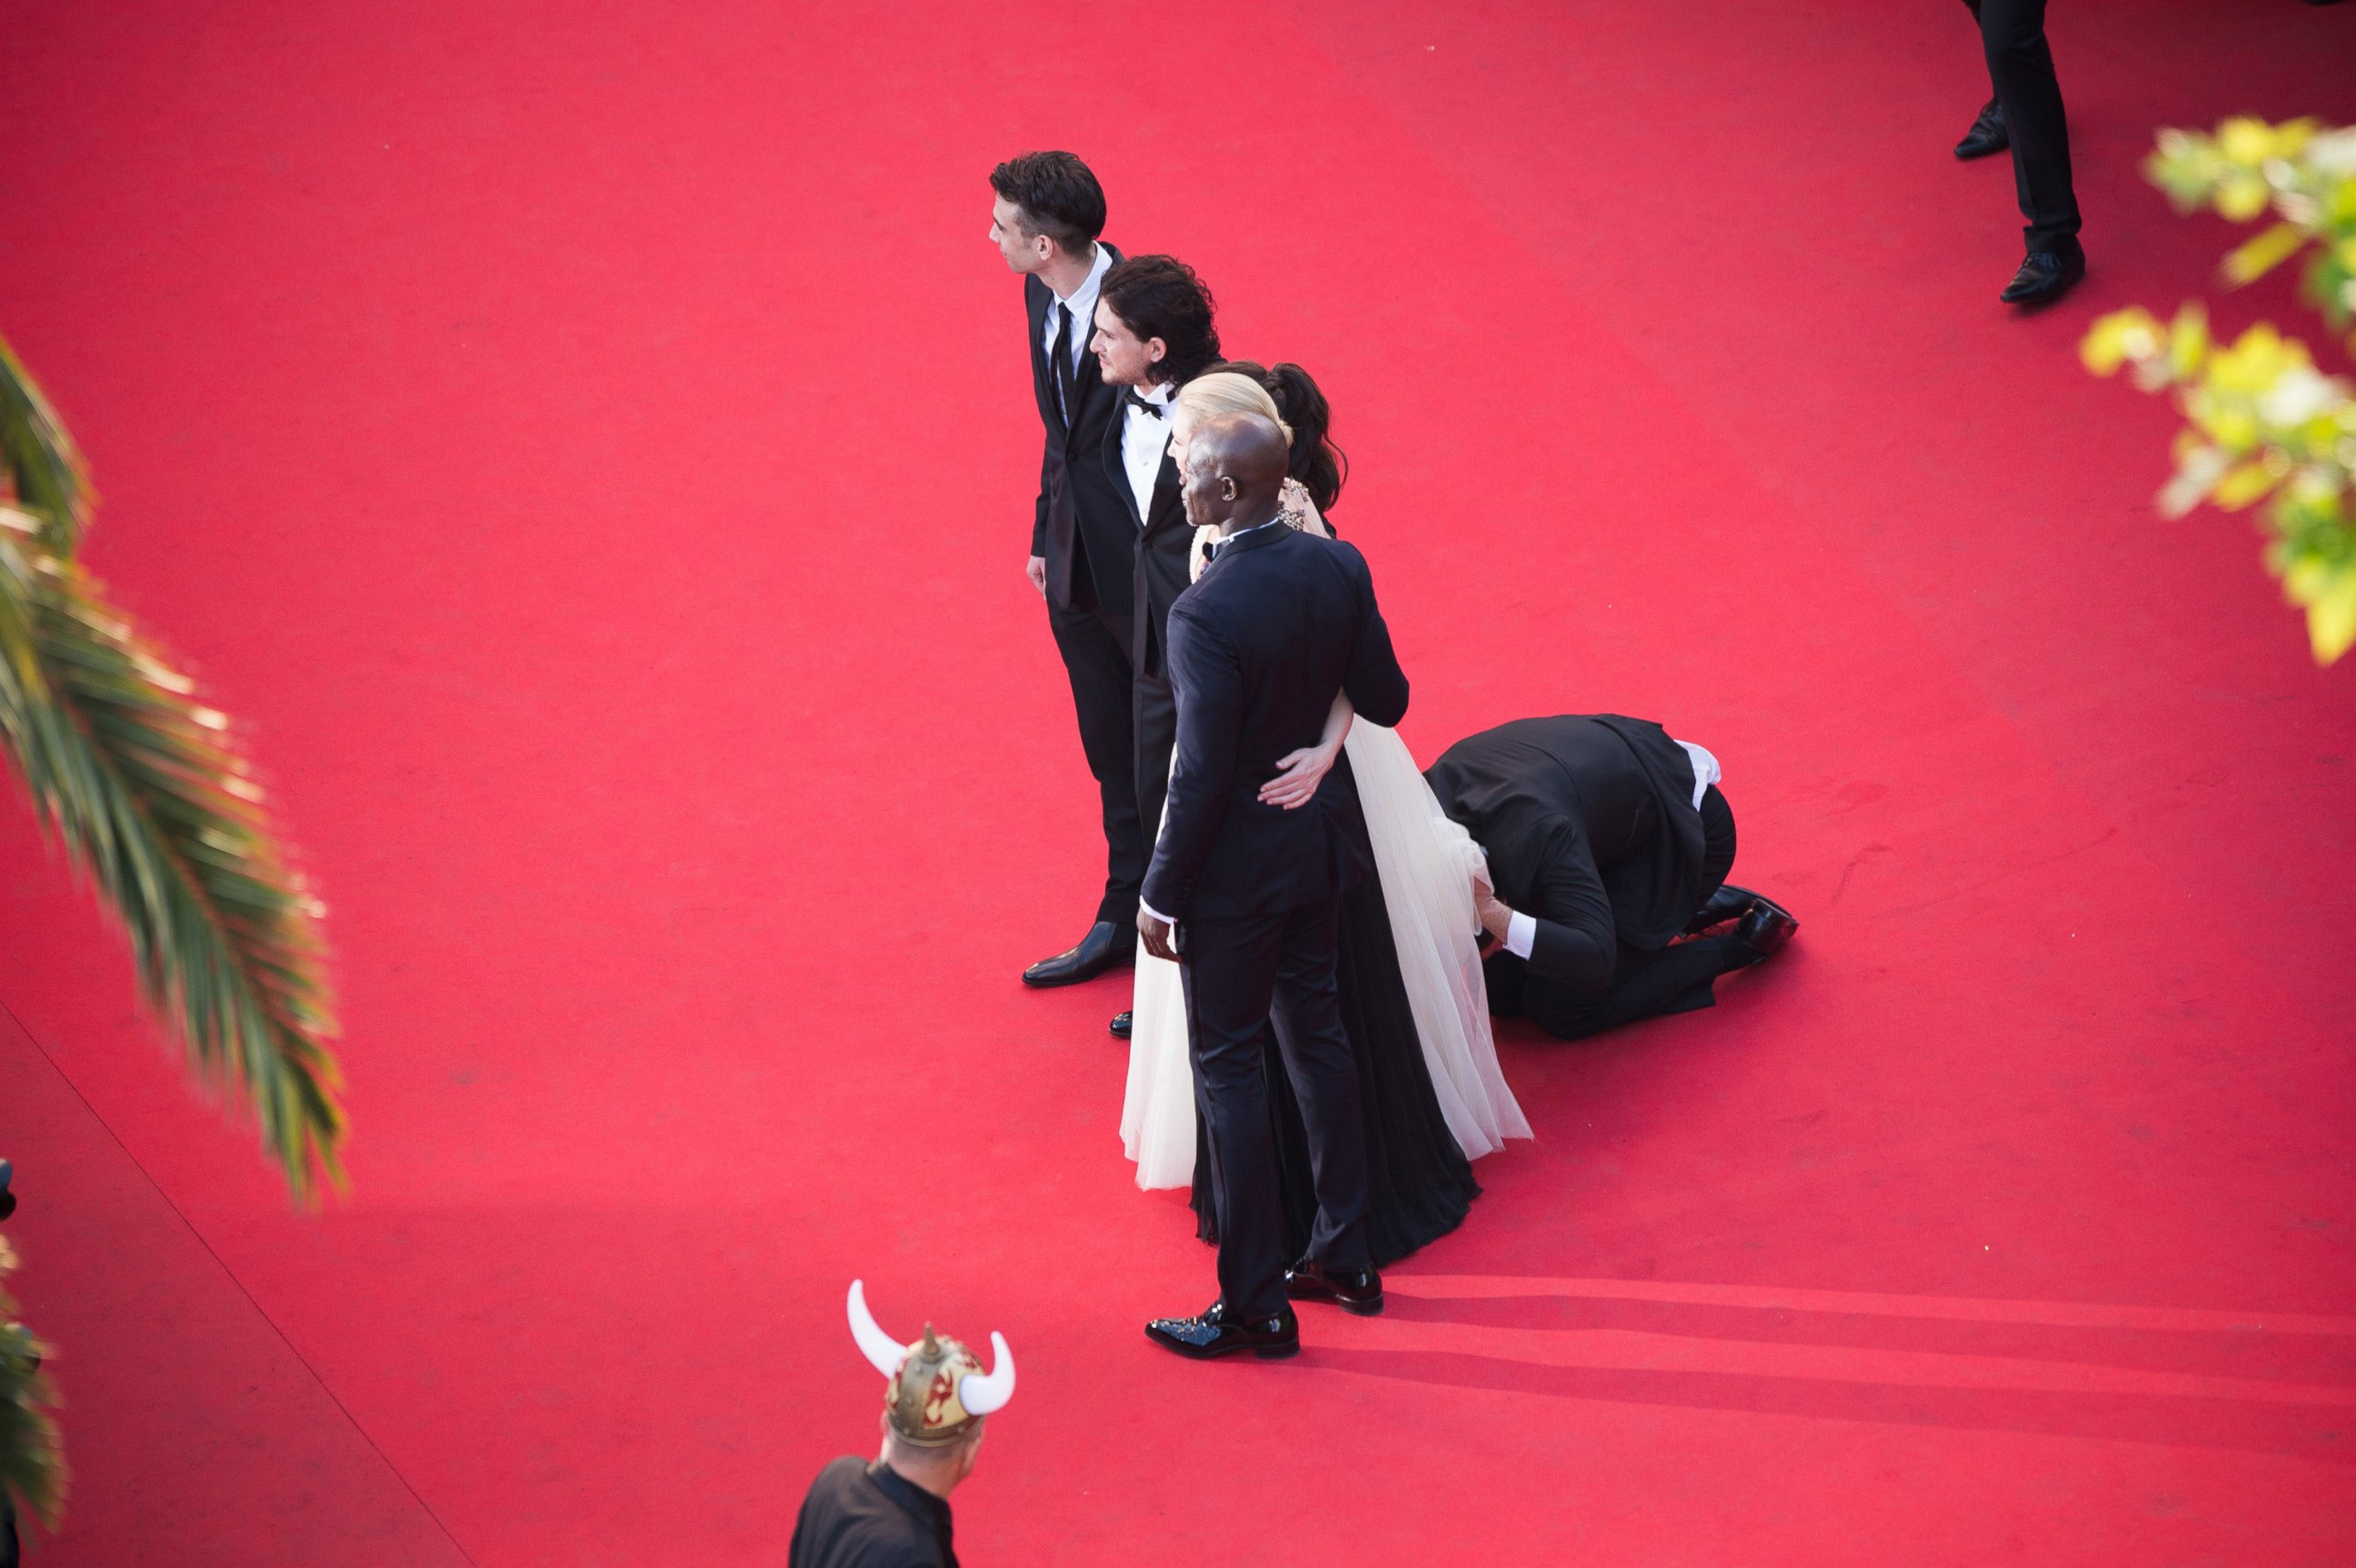 PHOTO: A man invades the Red Carpet as Jay Baruchel, Kit Harington, America Ferrera, Cate Blanchett and Djimon Hounsou pose at the 'How To Train Your Dragon 2' premiere during the 67th Annual Cannes Film Festival on May 16, 2014 in Cannes, France.